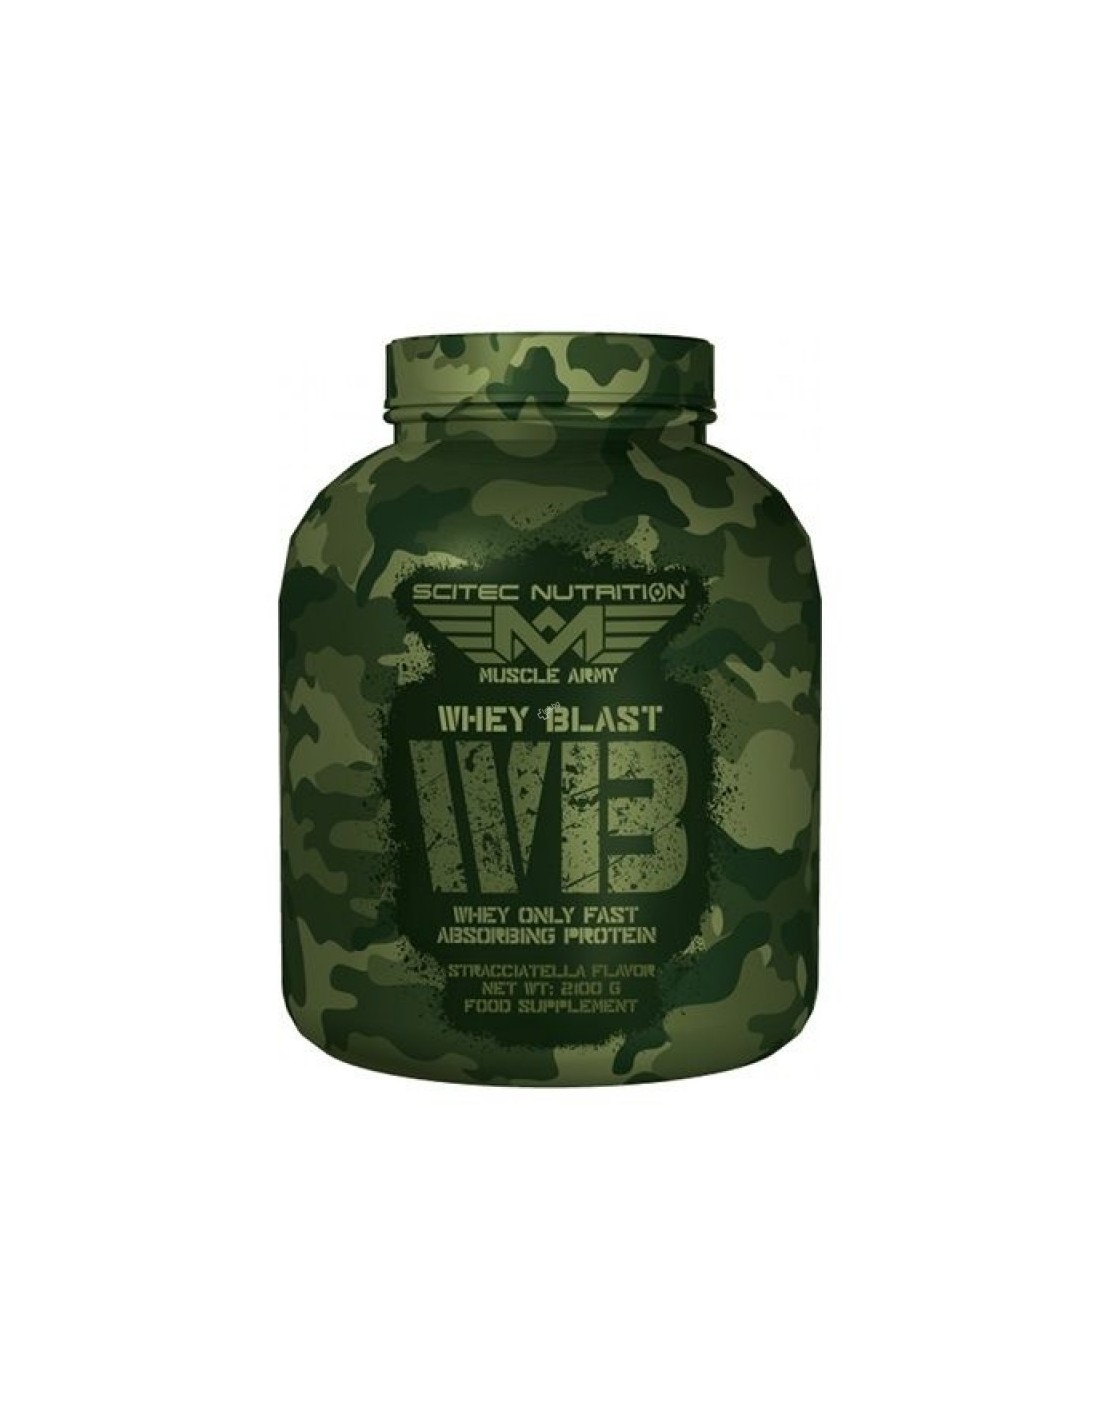 SCITEC - MUSCLE ARMY - WHEY BLAST - 2100 Г